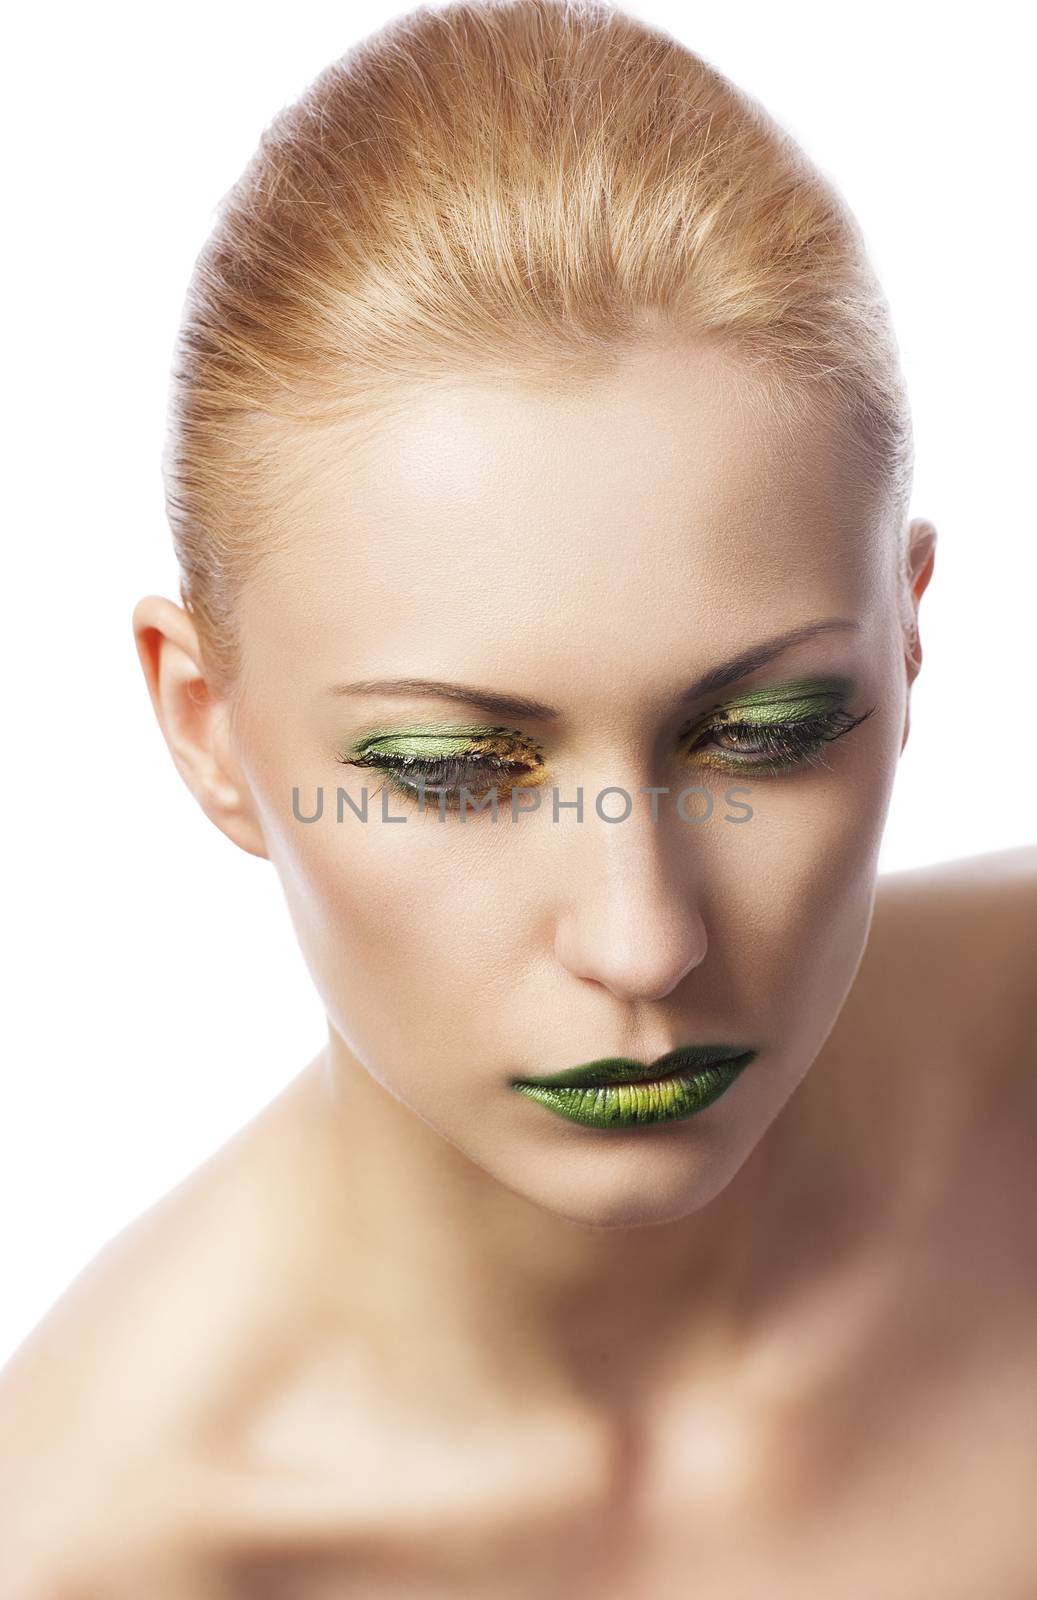 the floral makeup, she is turned of three quarters by fotoCD